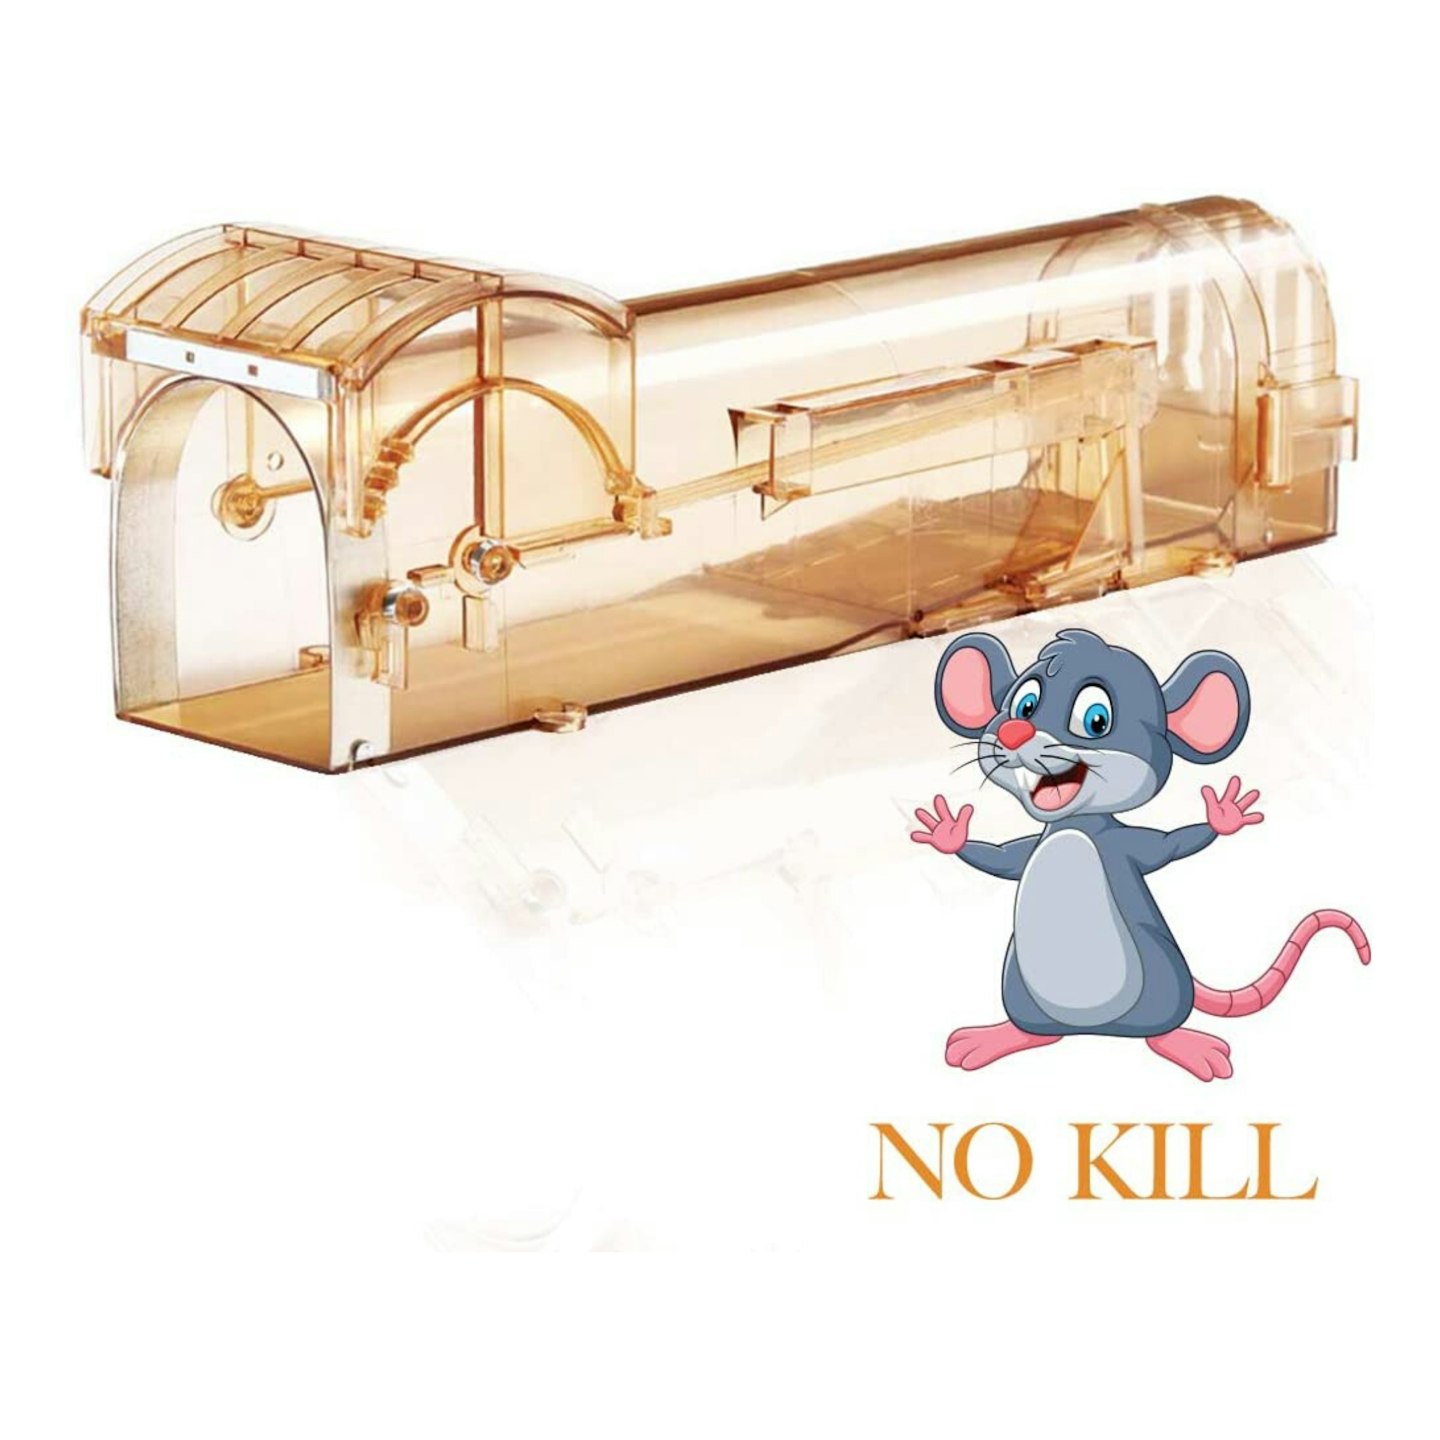  Motel Mouse Humane Mouse Traps No Kill Live Catch and